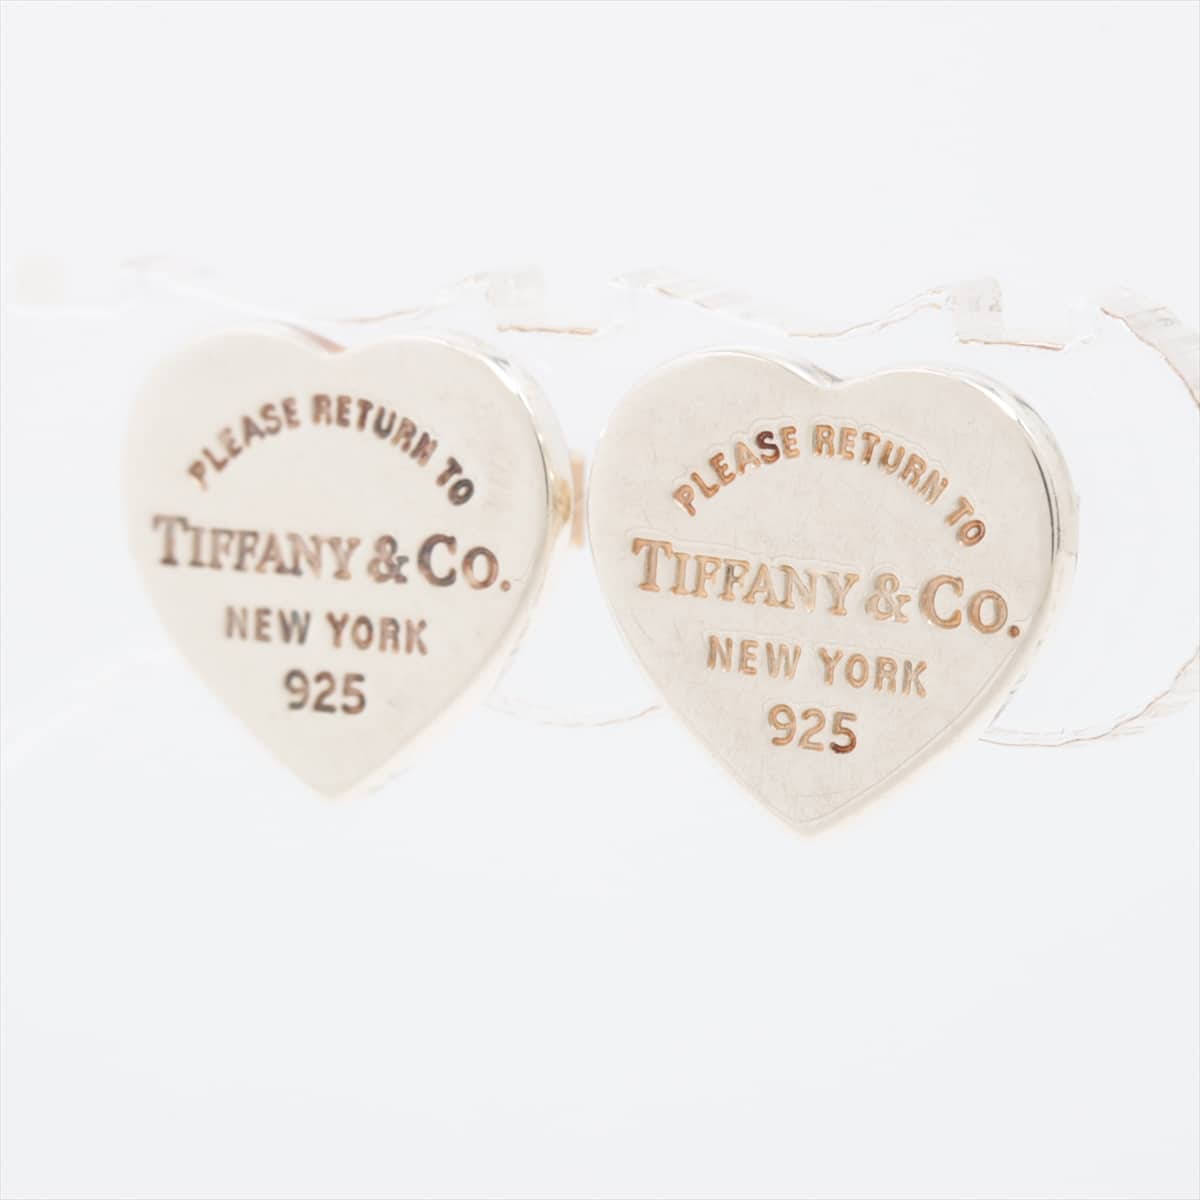 Tiffany Return To Tiffany Heart Tag Piercing jewelry (for both ears) 925 2.0g Silver